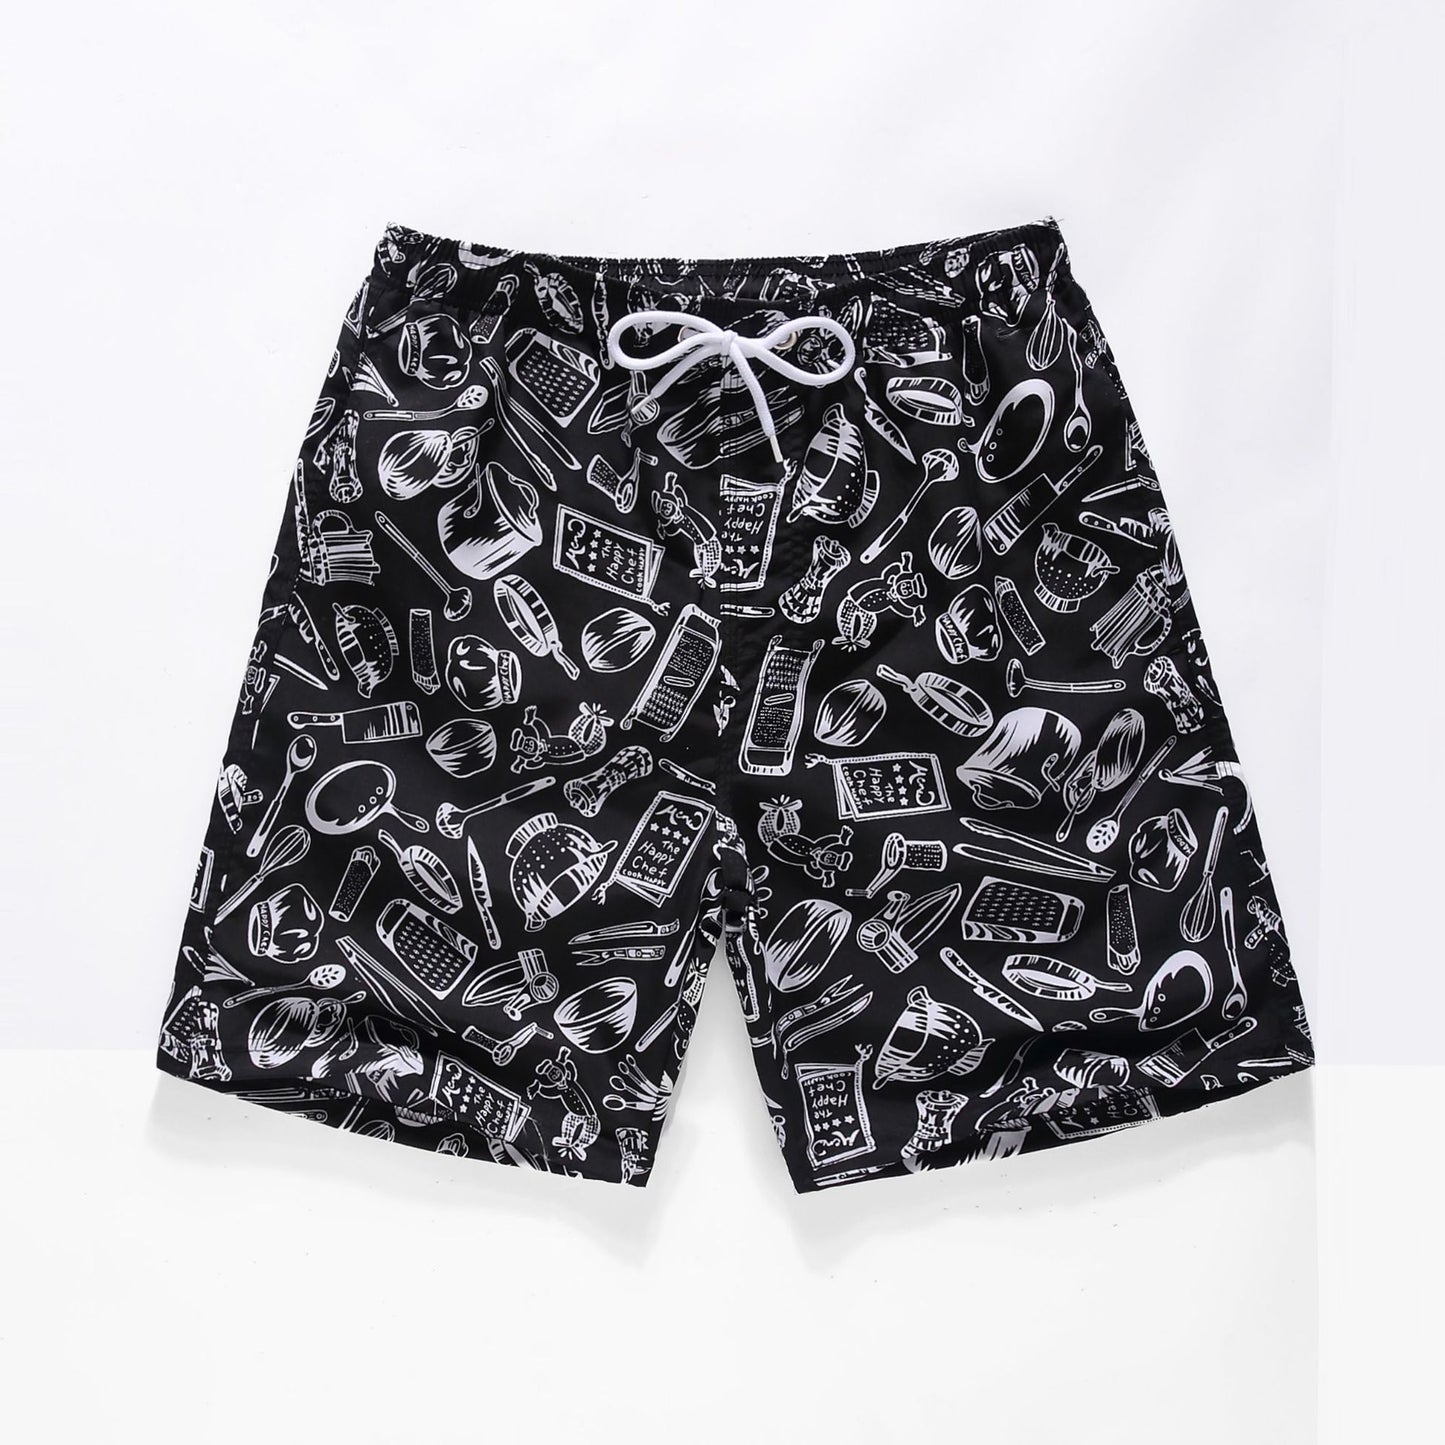 NS Summer Shorts Collection